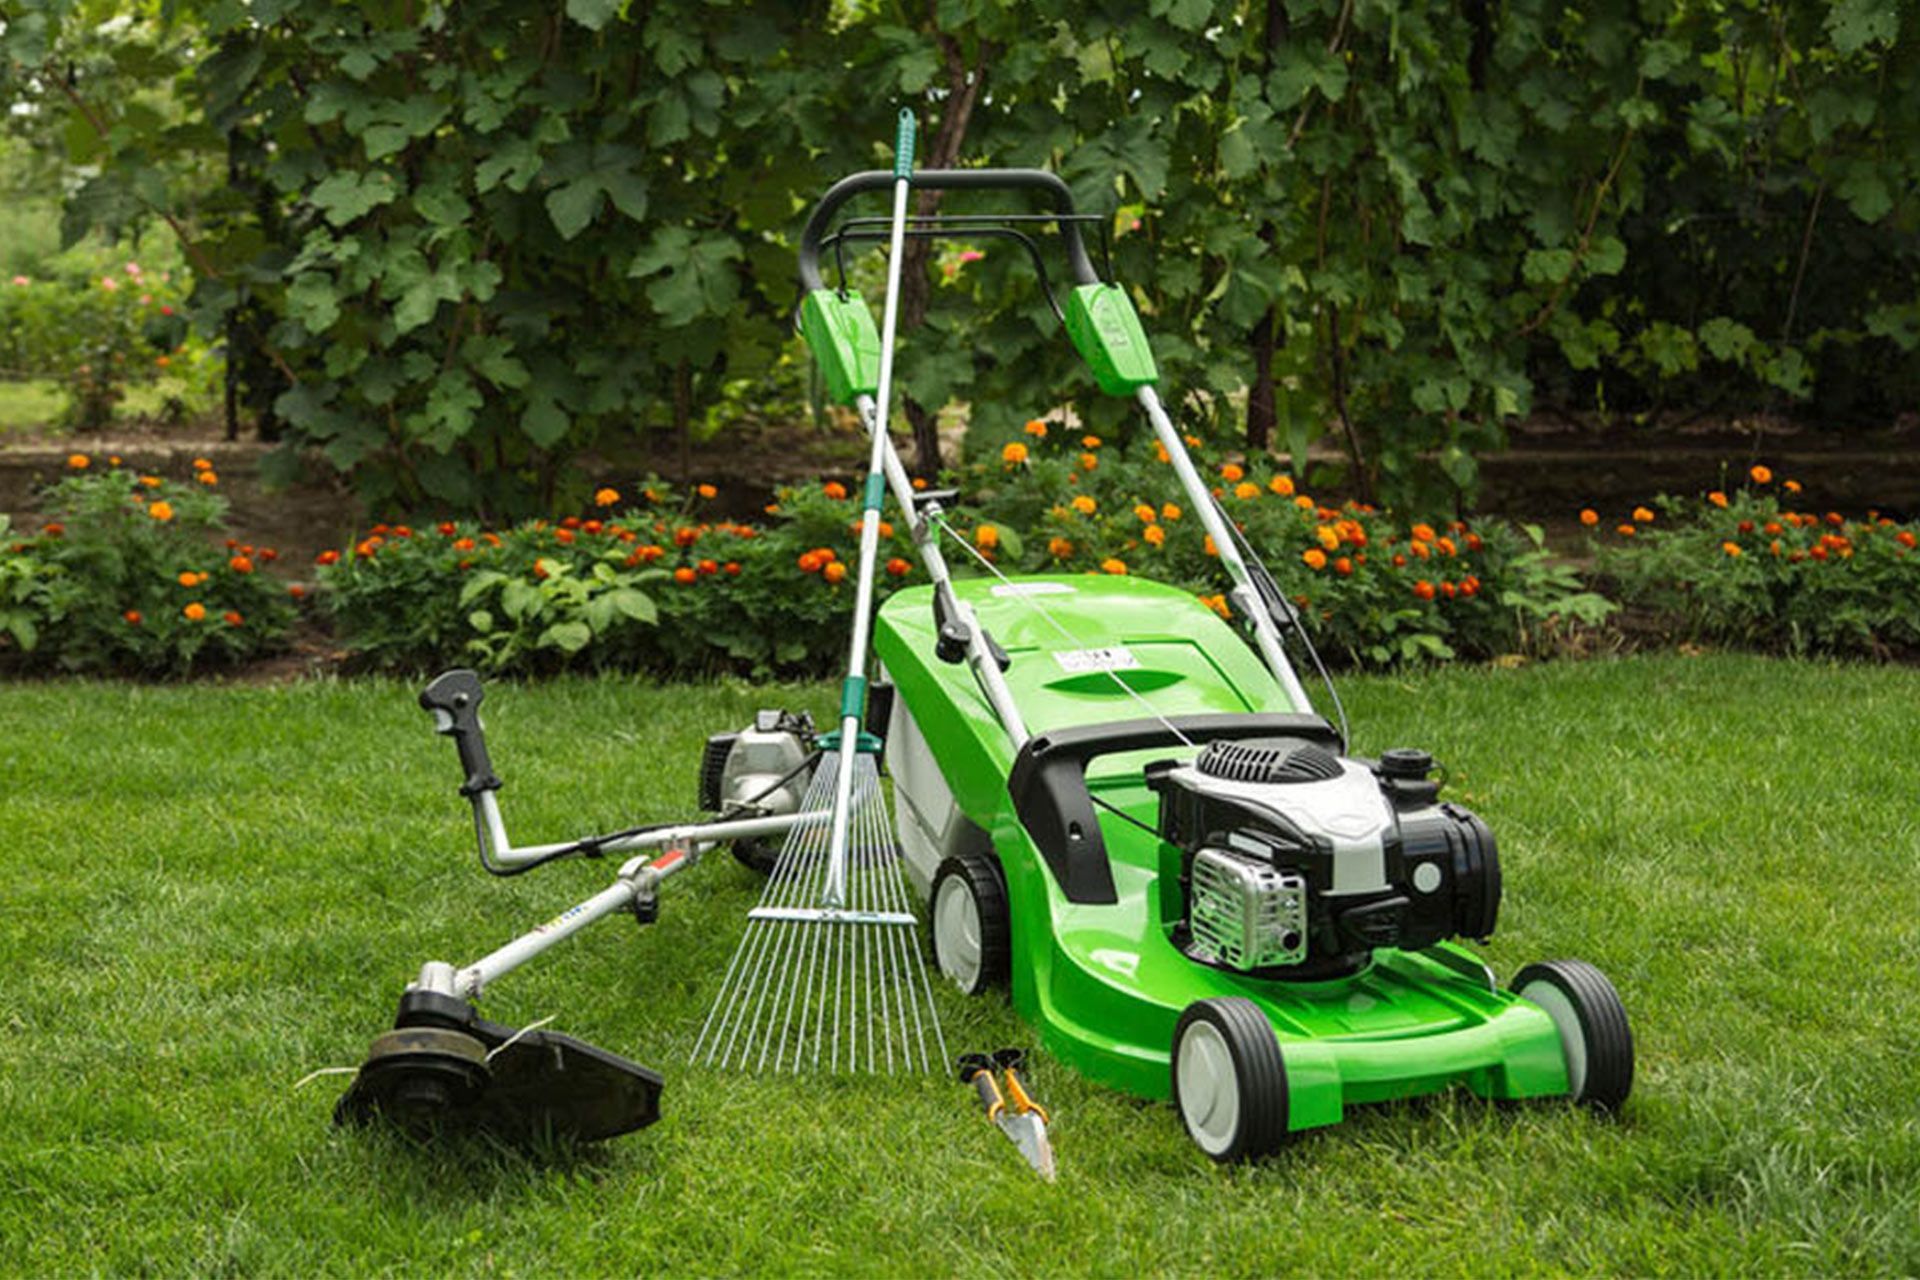 Lawn Aeration Services
